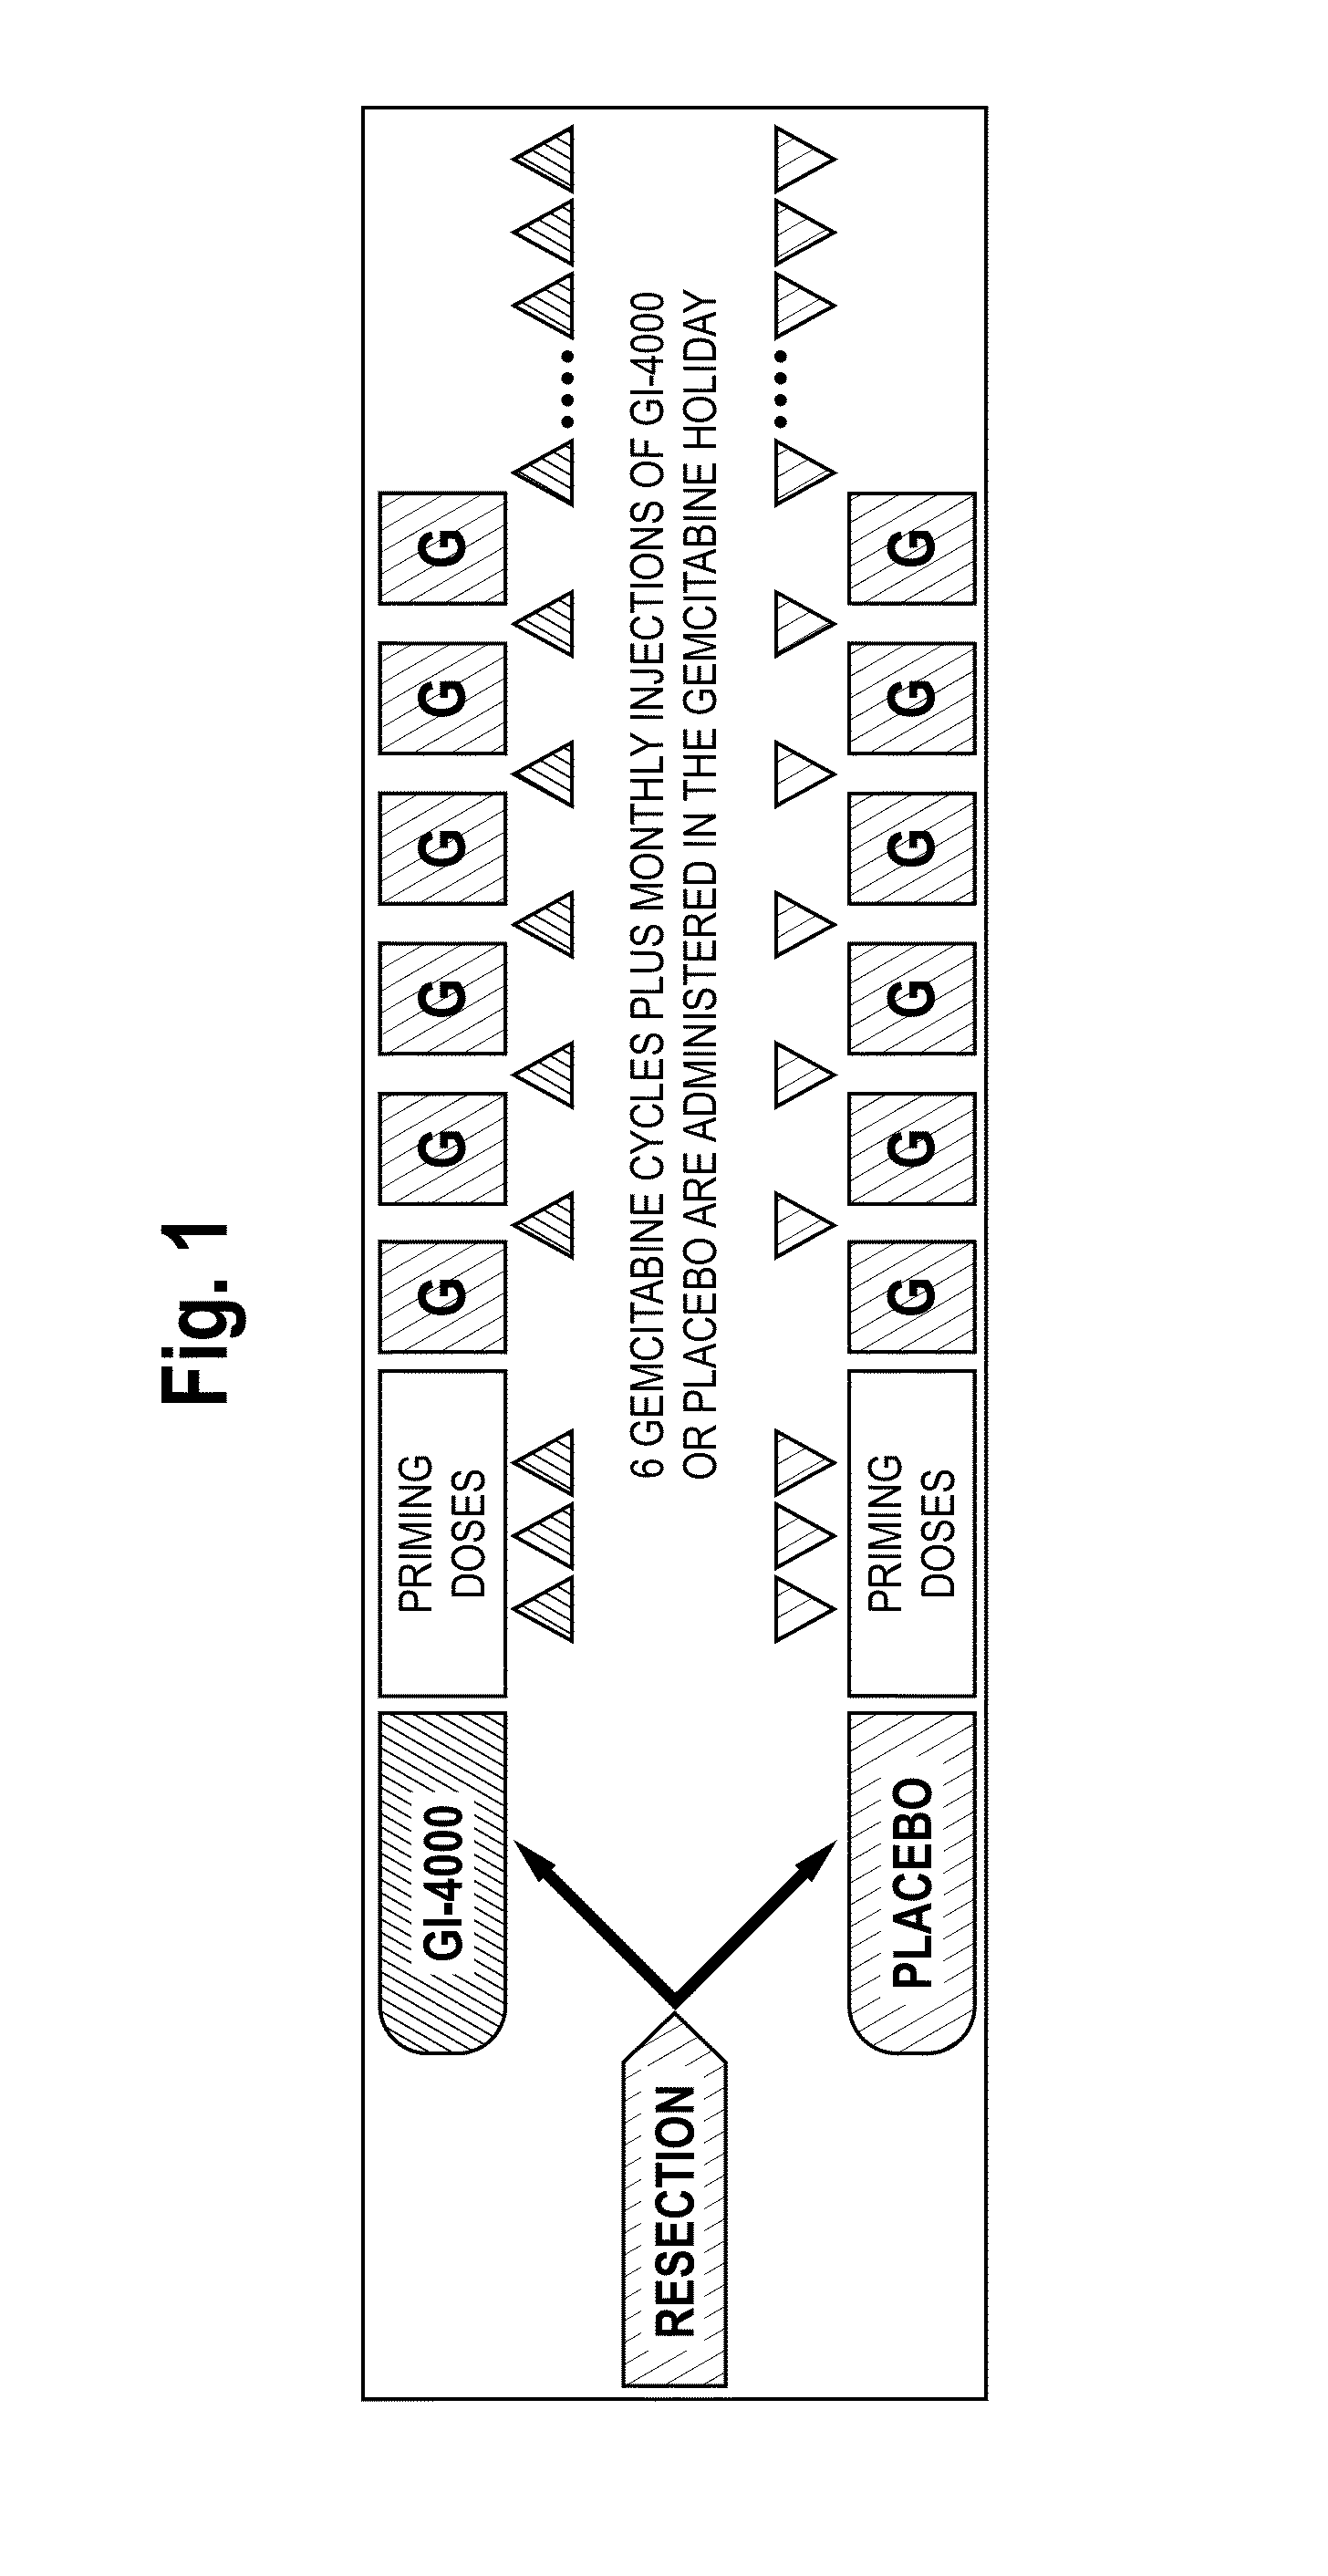 Mass-Spectral Method for Selection, and De-Selection, of Cancer Patients for Treatment with Immune Response Generating Therapies